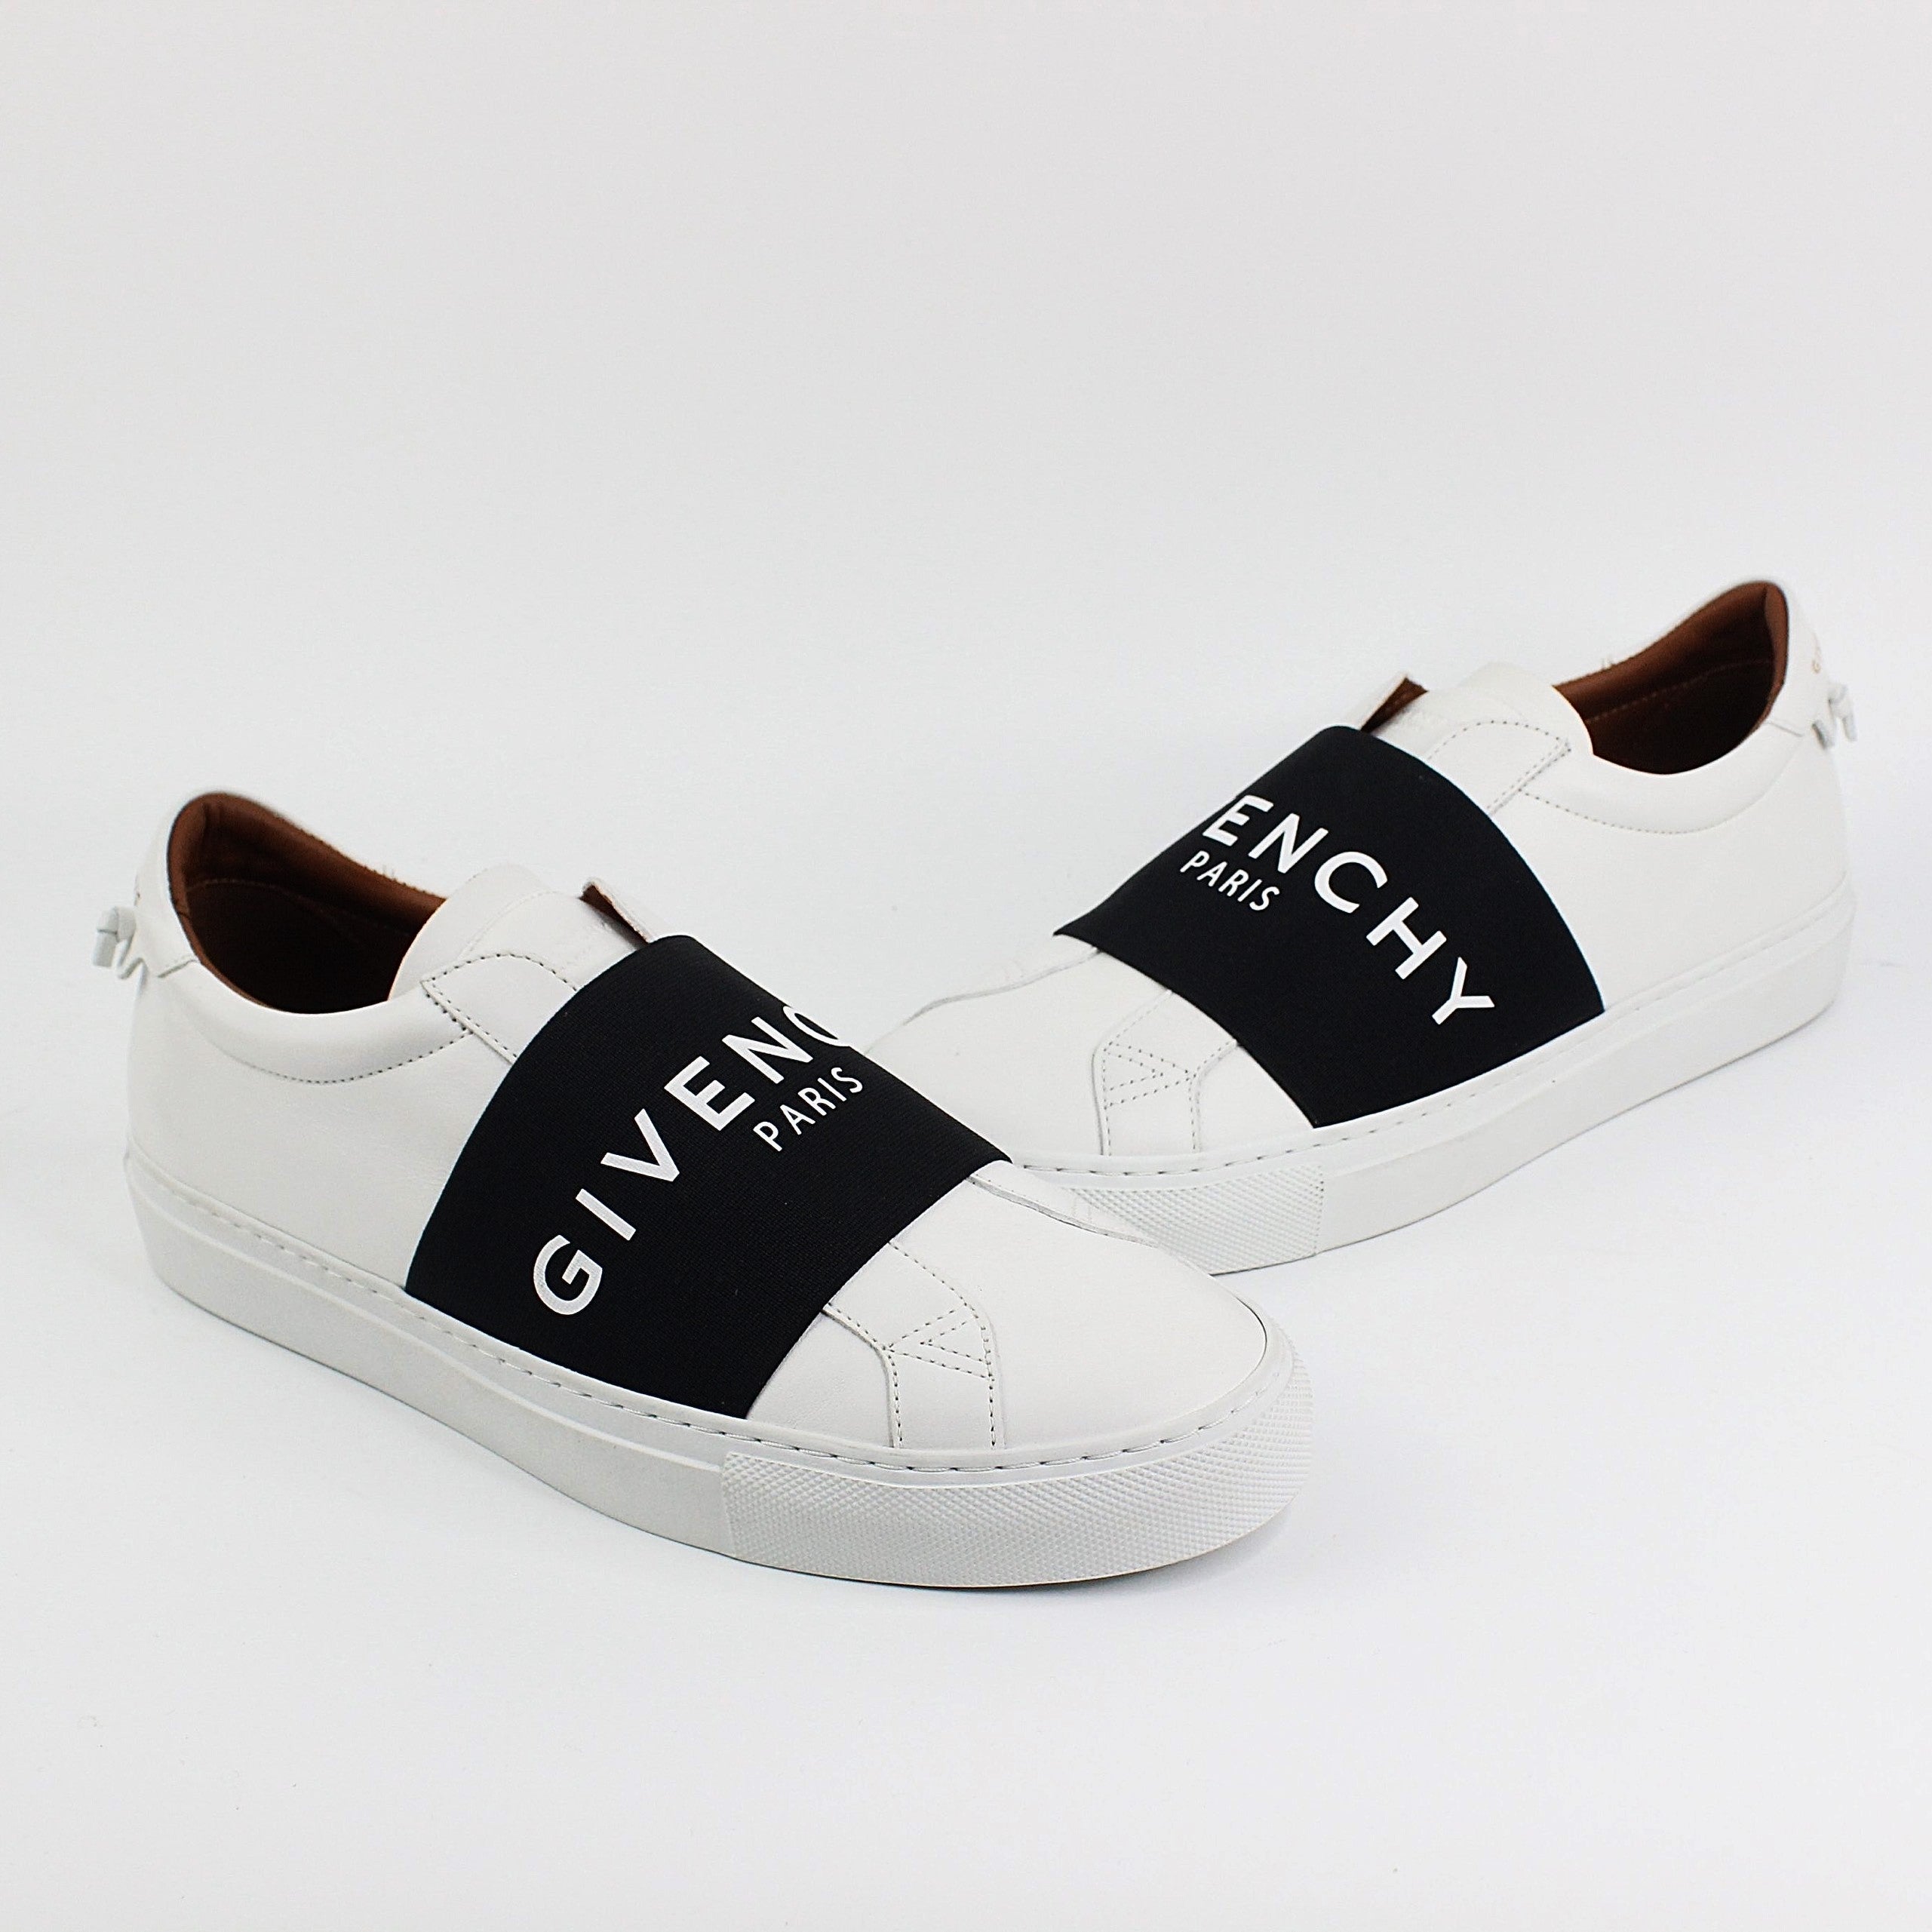 Givenchy Urban Street Elastic Mens White Casual Sneakers | eBay